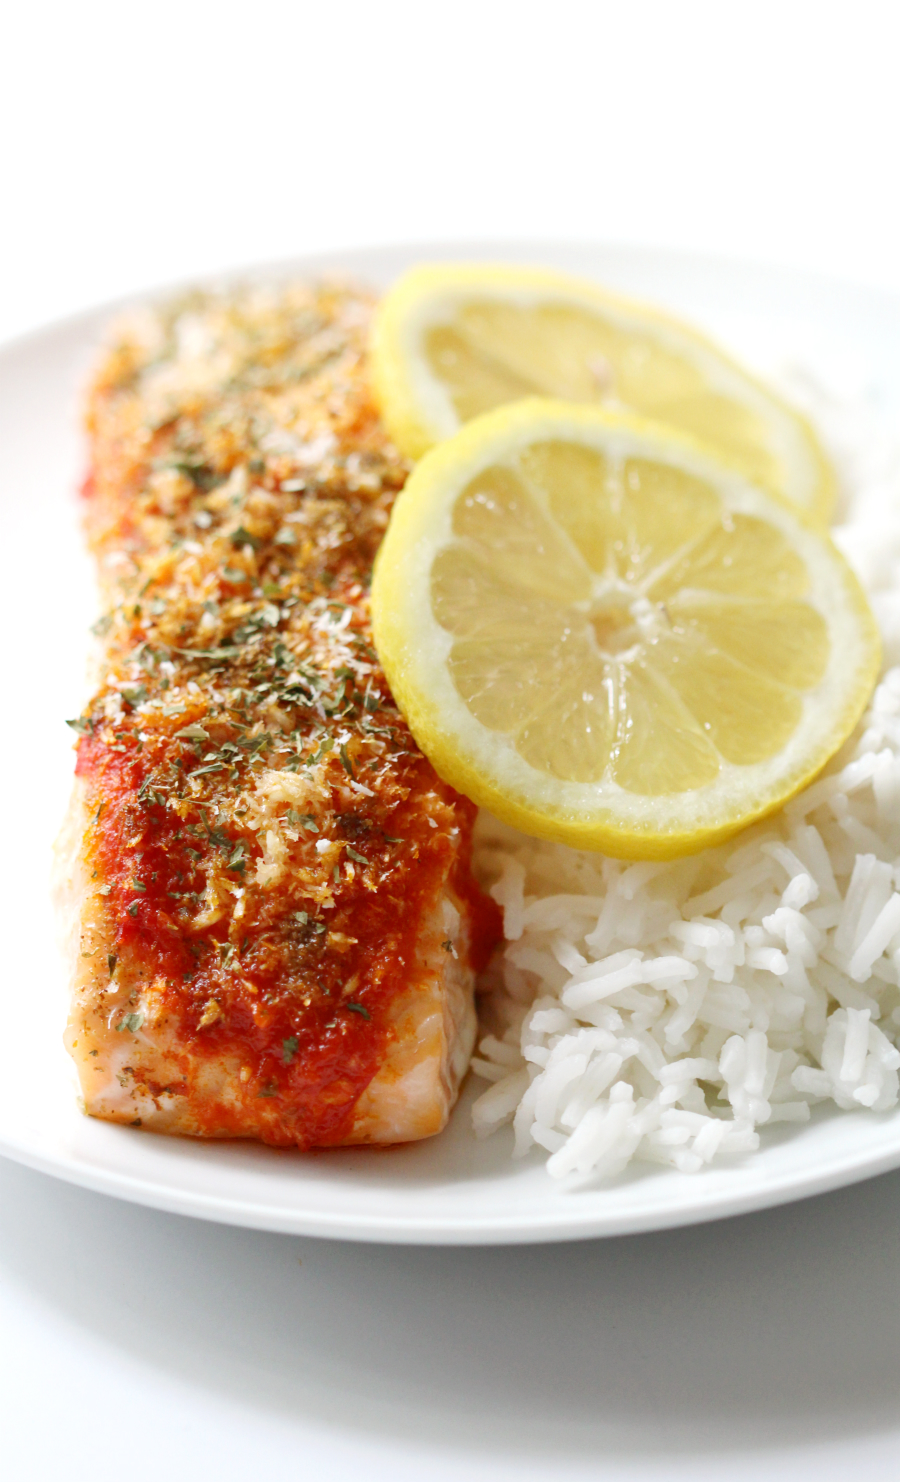 Harissa Salmon with Shredded Coconut | Strength and Sunshine @RebeccaGF666 A delicious new way to flavor up your favorite fish! Harissa Salmon with Shredded Coconut is a healthy new recipe to add to the dinner plate. Gluten-Free, paleo, and whole 30 friendly, so you'll never be bored!